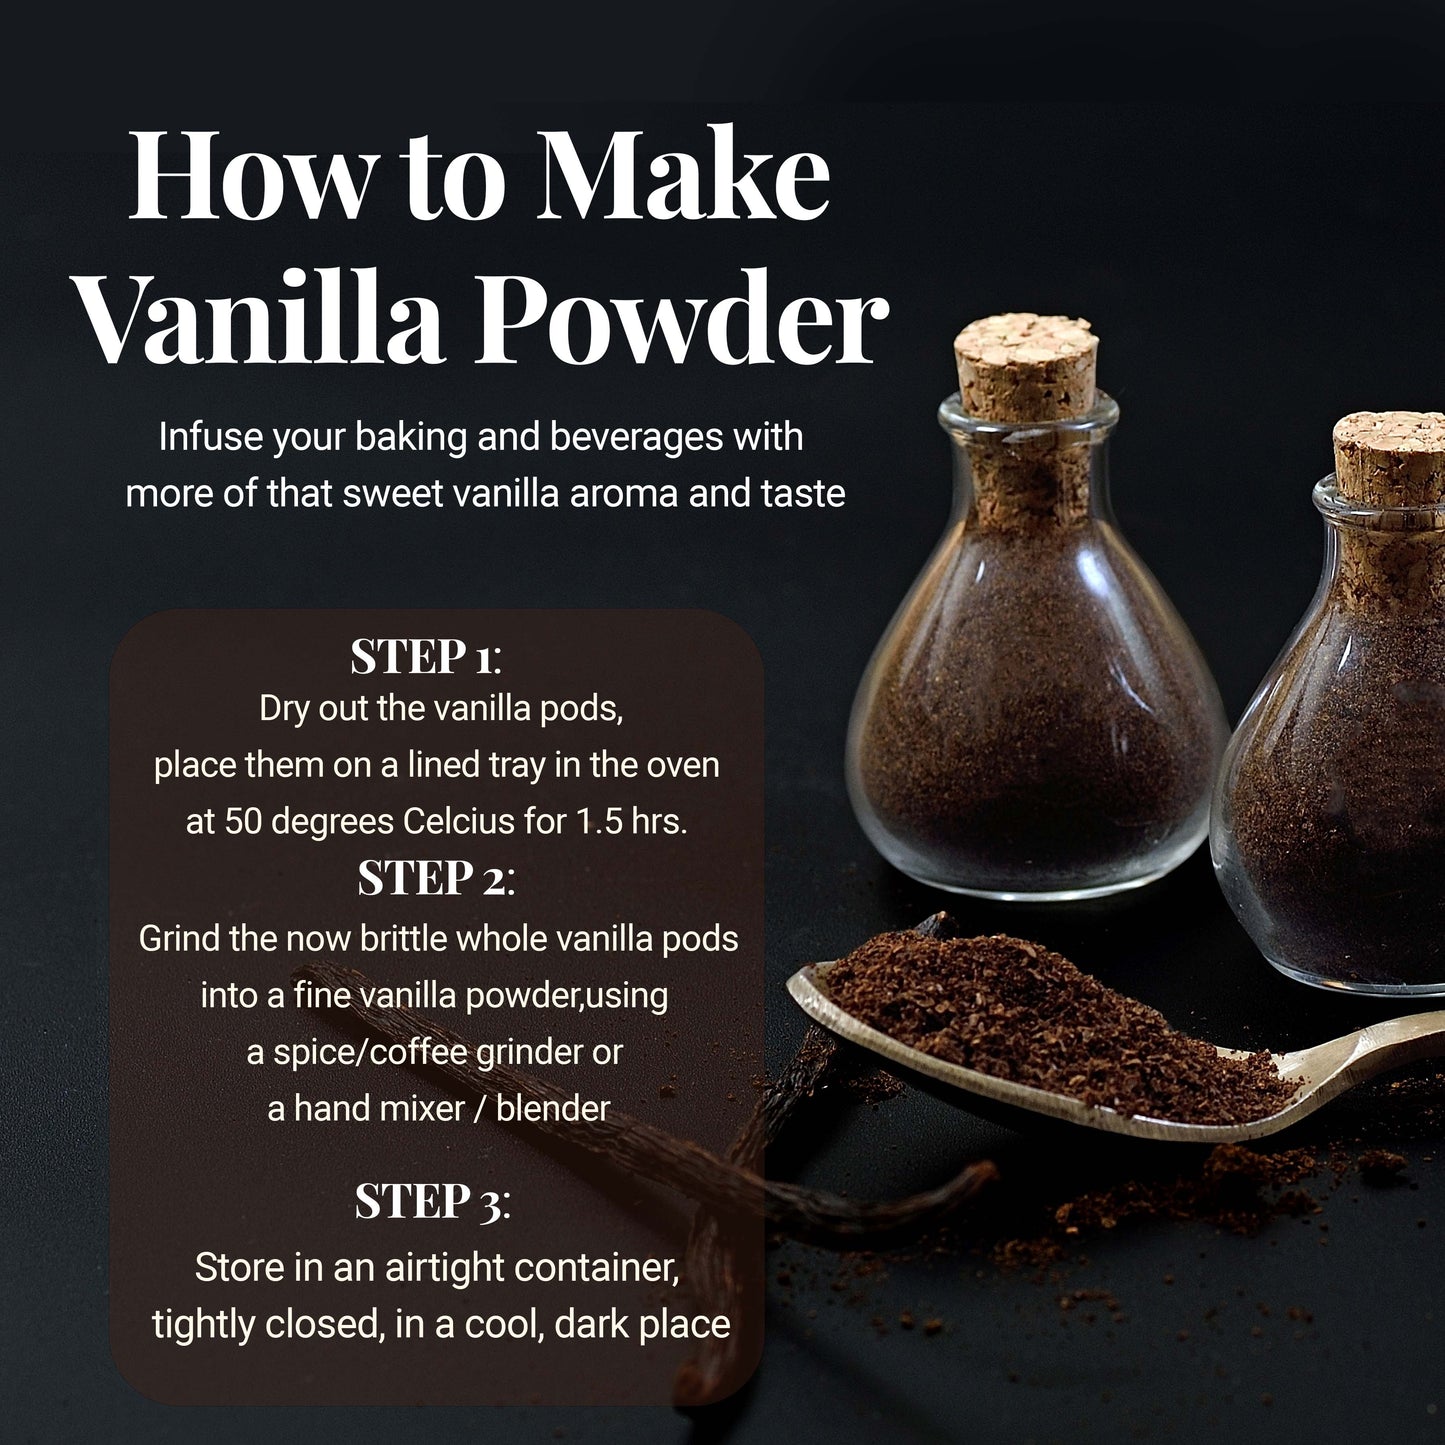 How to make vanilla Powder: infuse your baking and beverages with more of that sweet vanilla aroma and taste. STEP 1: Dry out the vanilla pods. Place them on a line tray in the oven at 50 degrees Celsius for 1.5 hrs.  STEP 2: Grind the now brittle whole Vanilla pods into a fine vanilla powder,using a spice/coffee grinder or a hand mixer/blender. STEP 3: Store in an airtight container tightly closed, in a cool, dark place